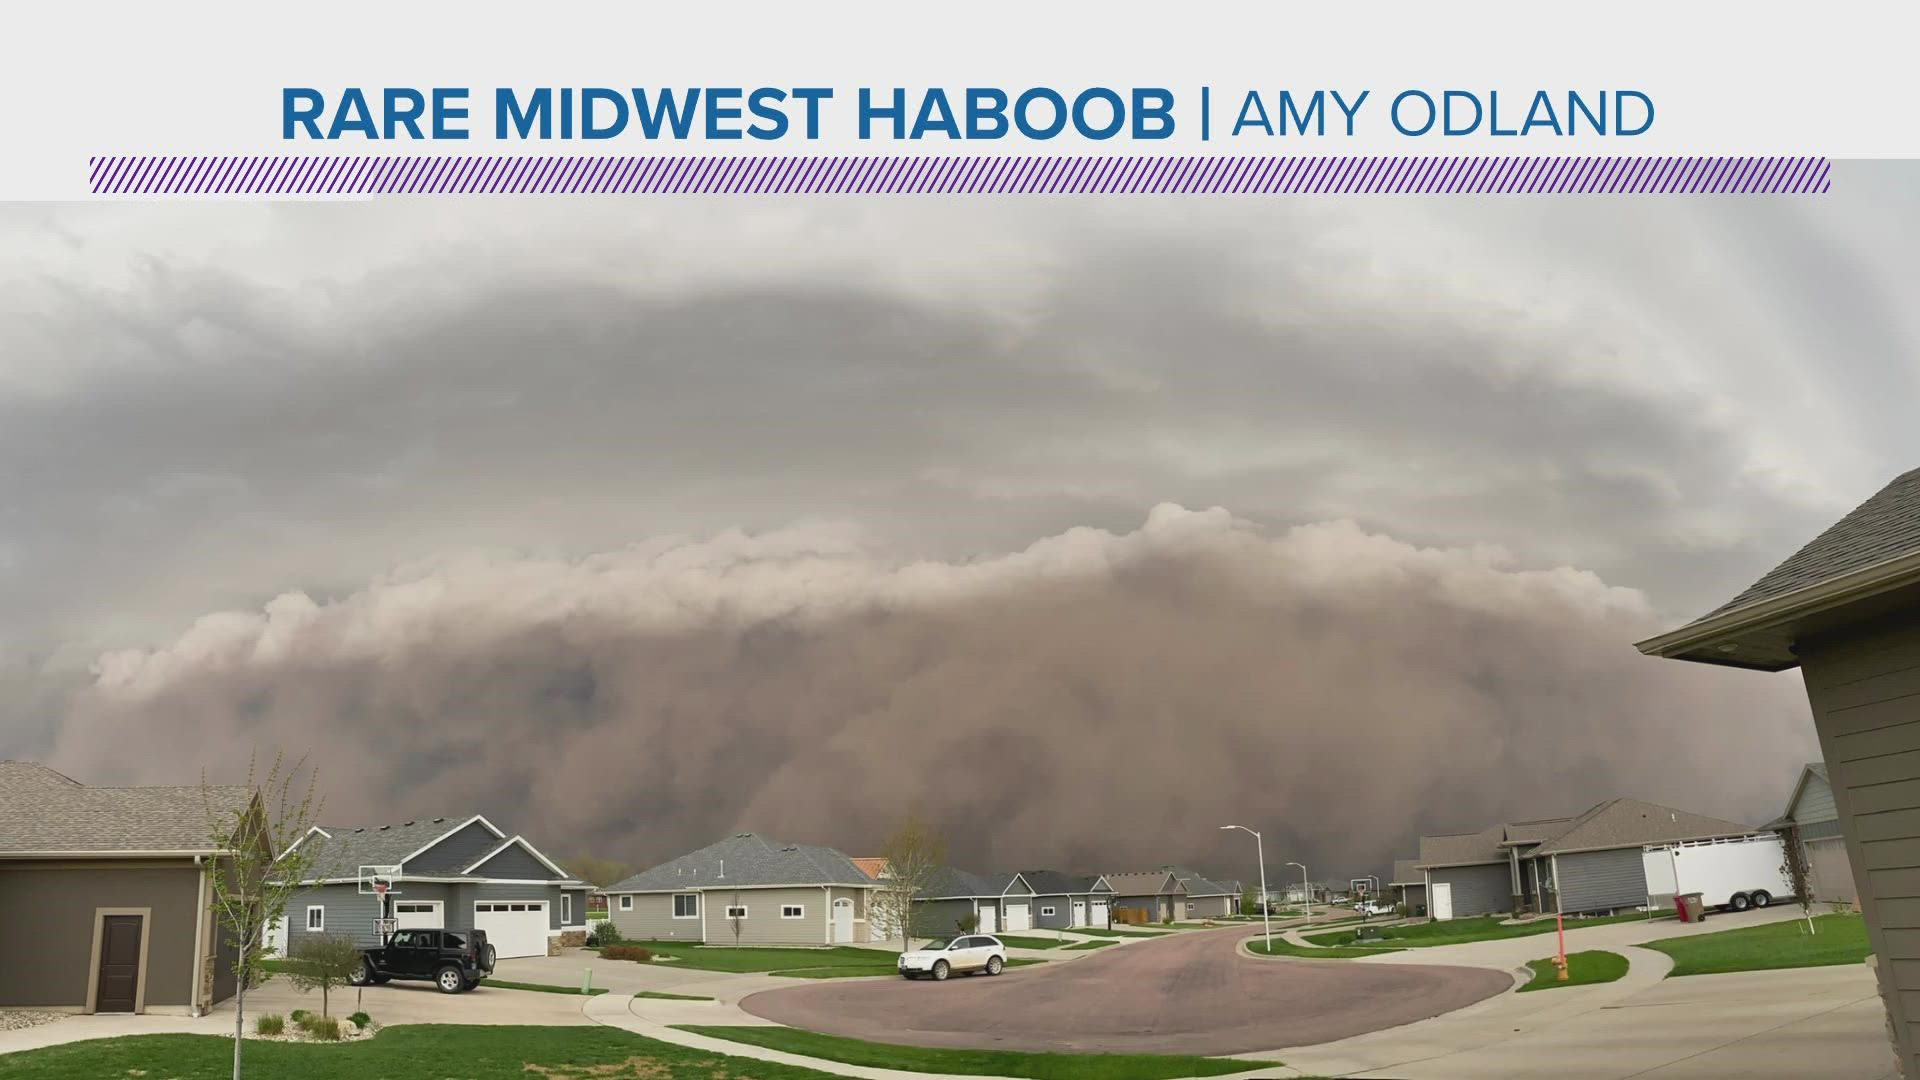 Haboobs, or dust storms, are big areas of dust often associated with strong thunderstorm winds.